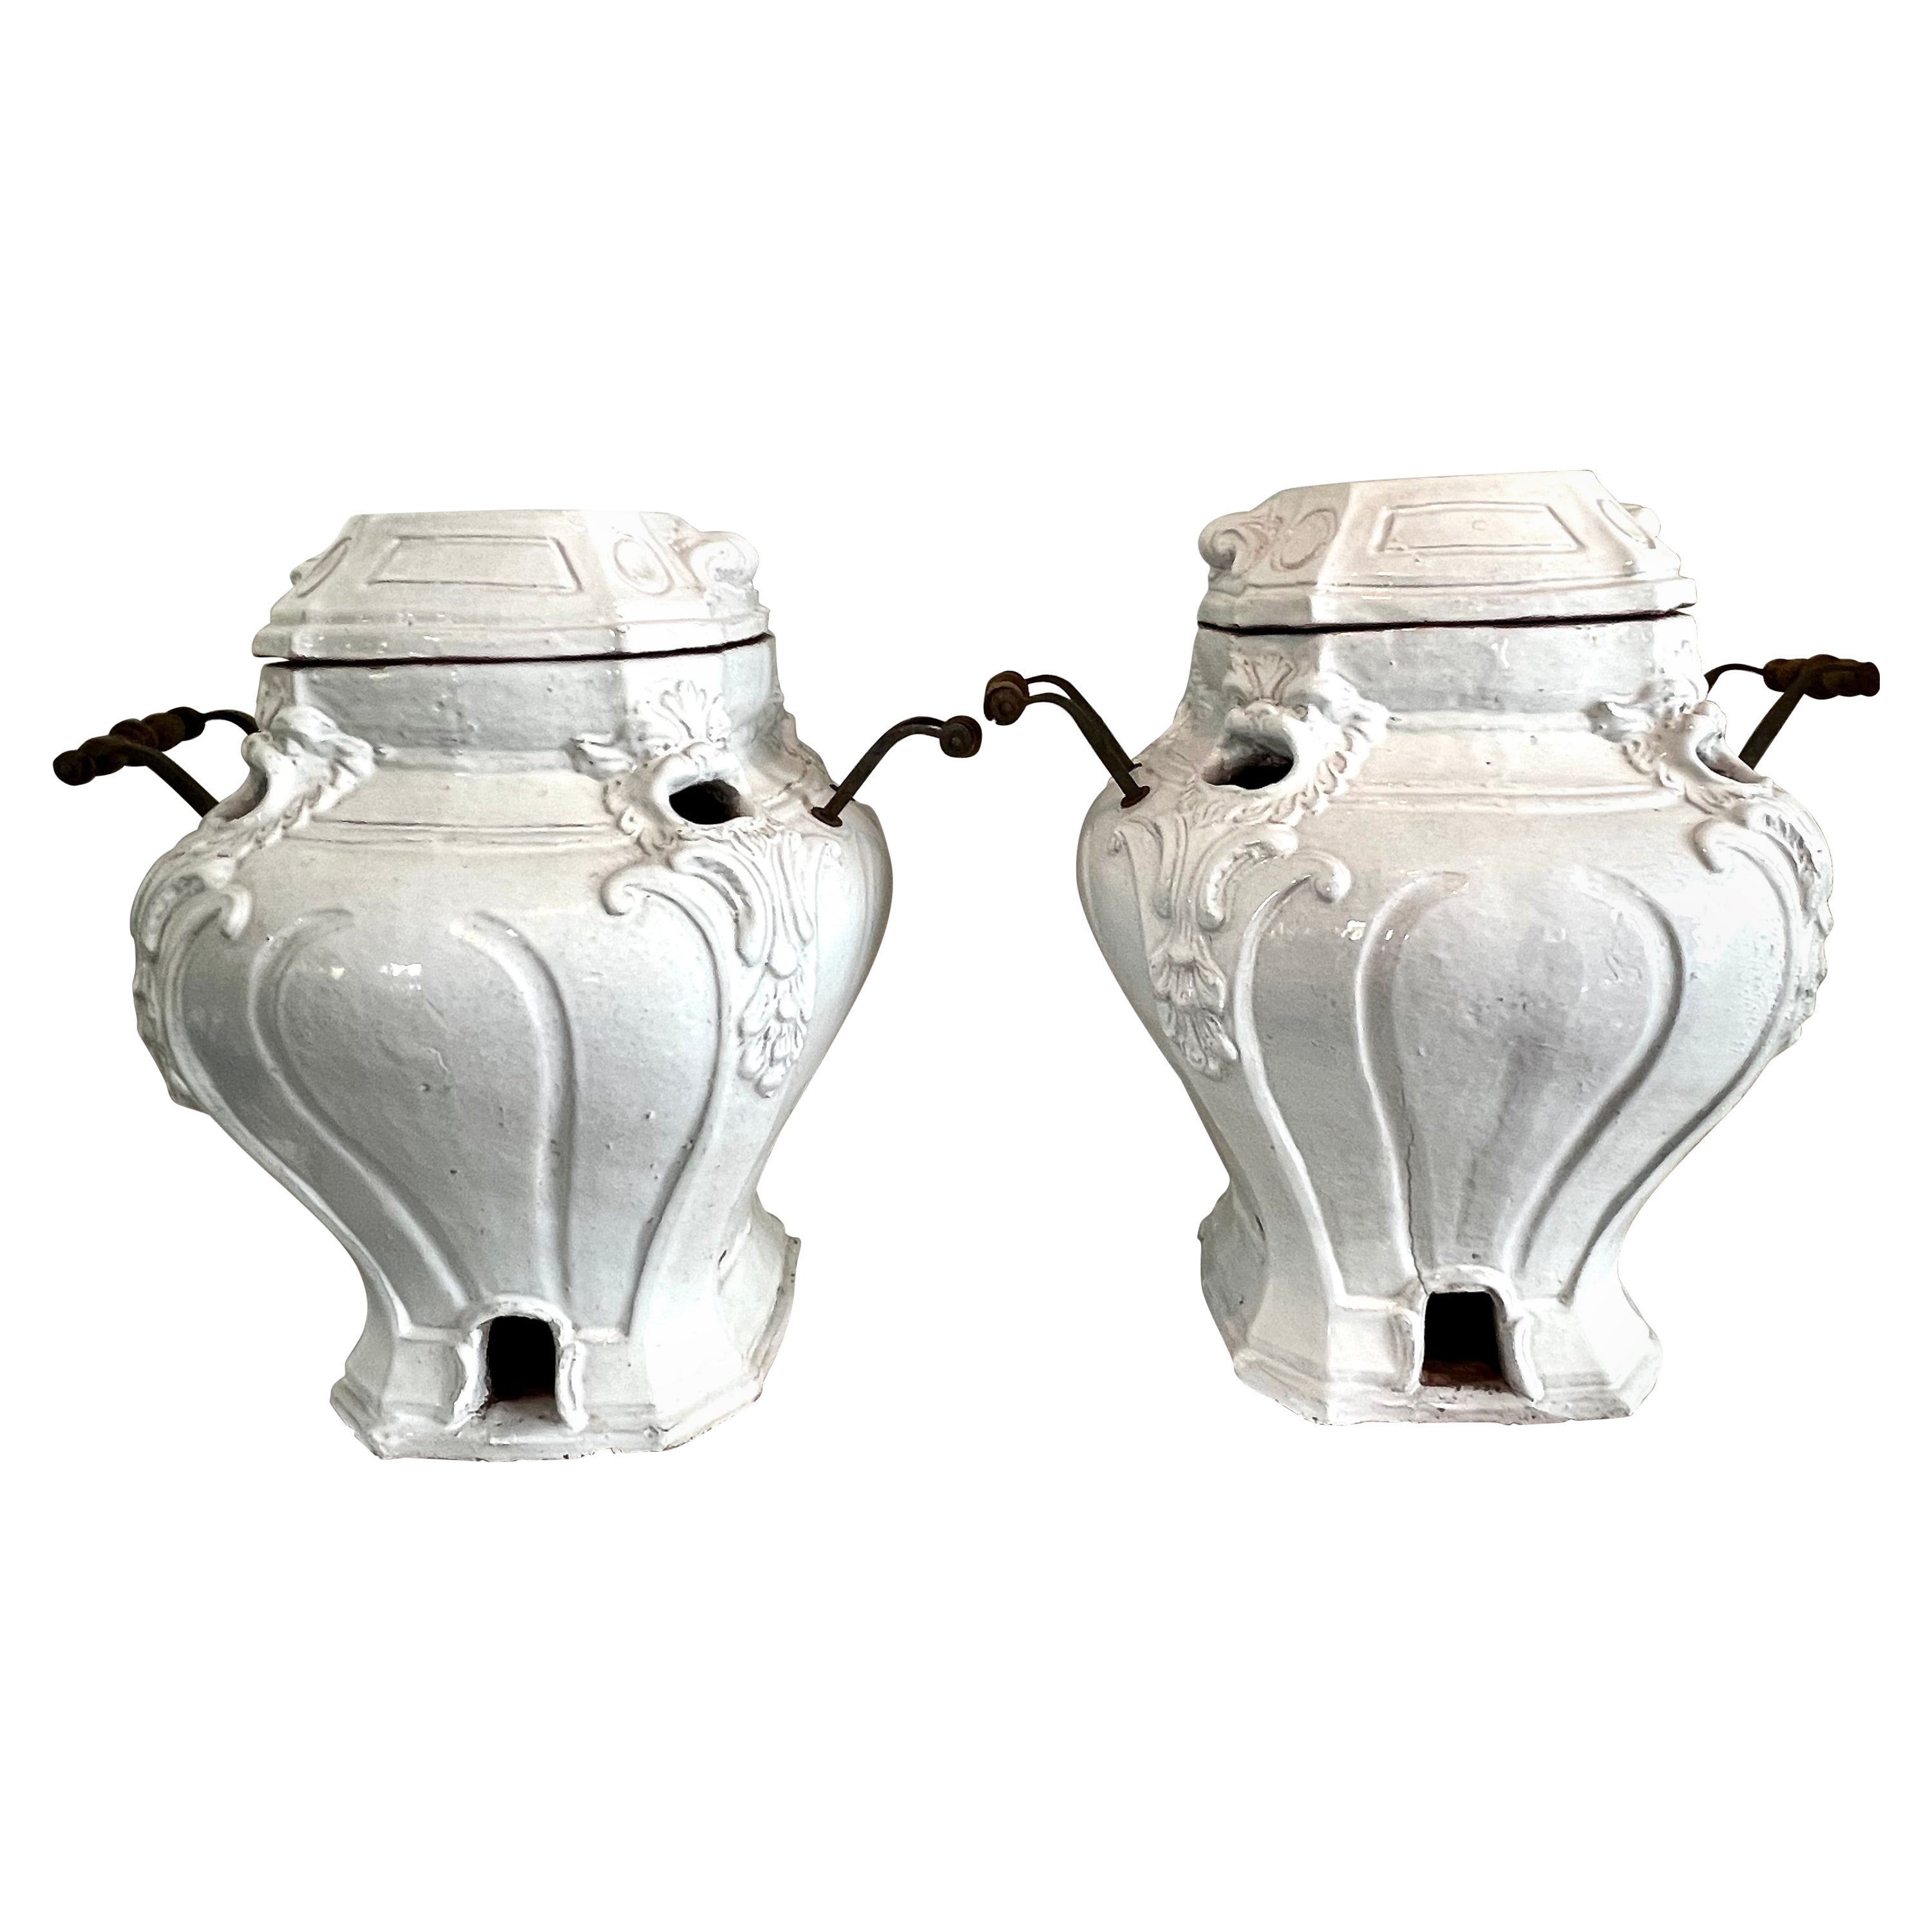 Pair of Glazed Terracotta Garden Urns or Jardinieres with Metal and Wood Handles